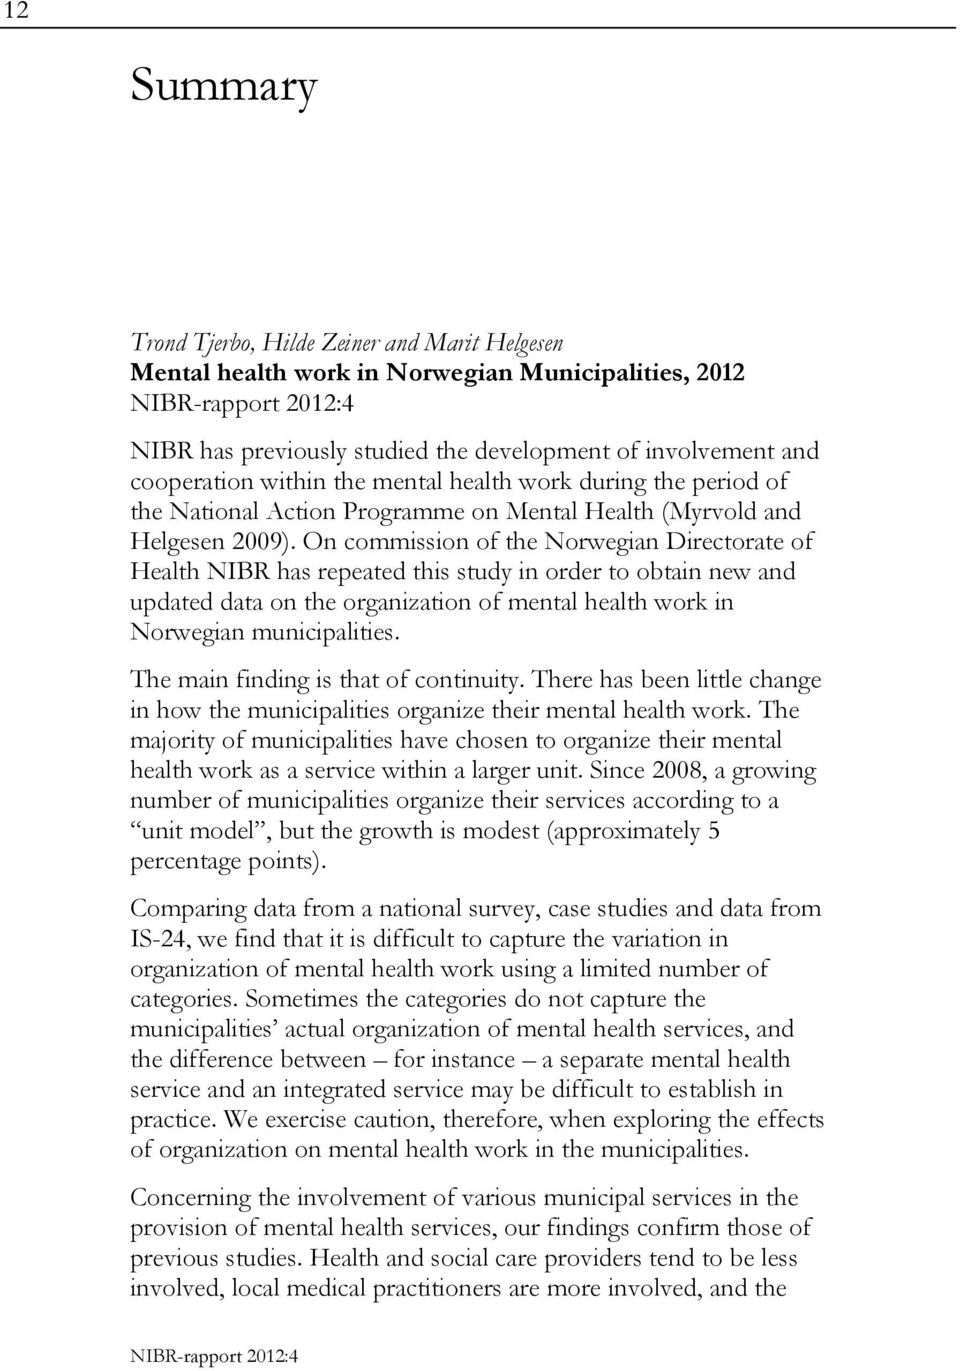 On commission of the Norwegian Directorate of Health NIBR has repeated this study in order to obtain new and updated data on the organization of mental health work in Norwegian municipalities.